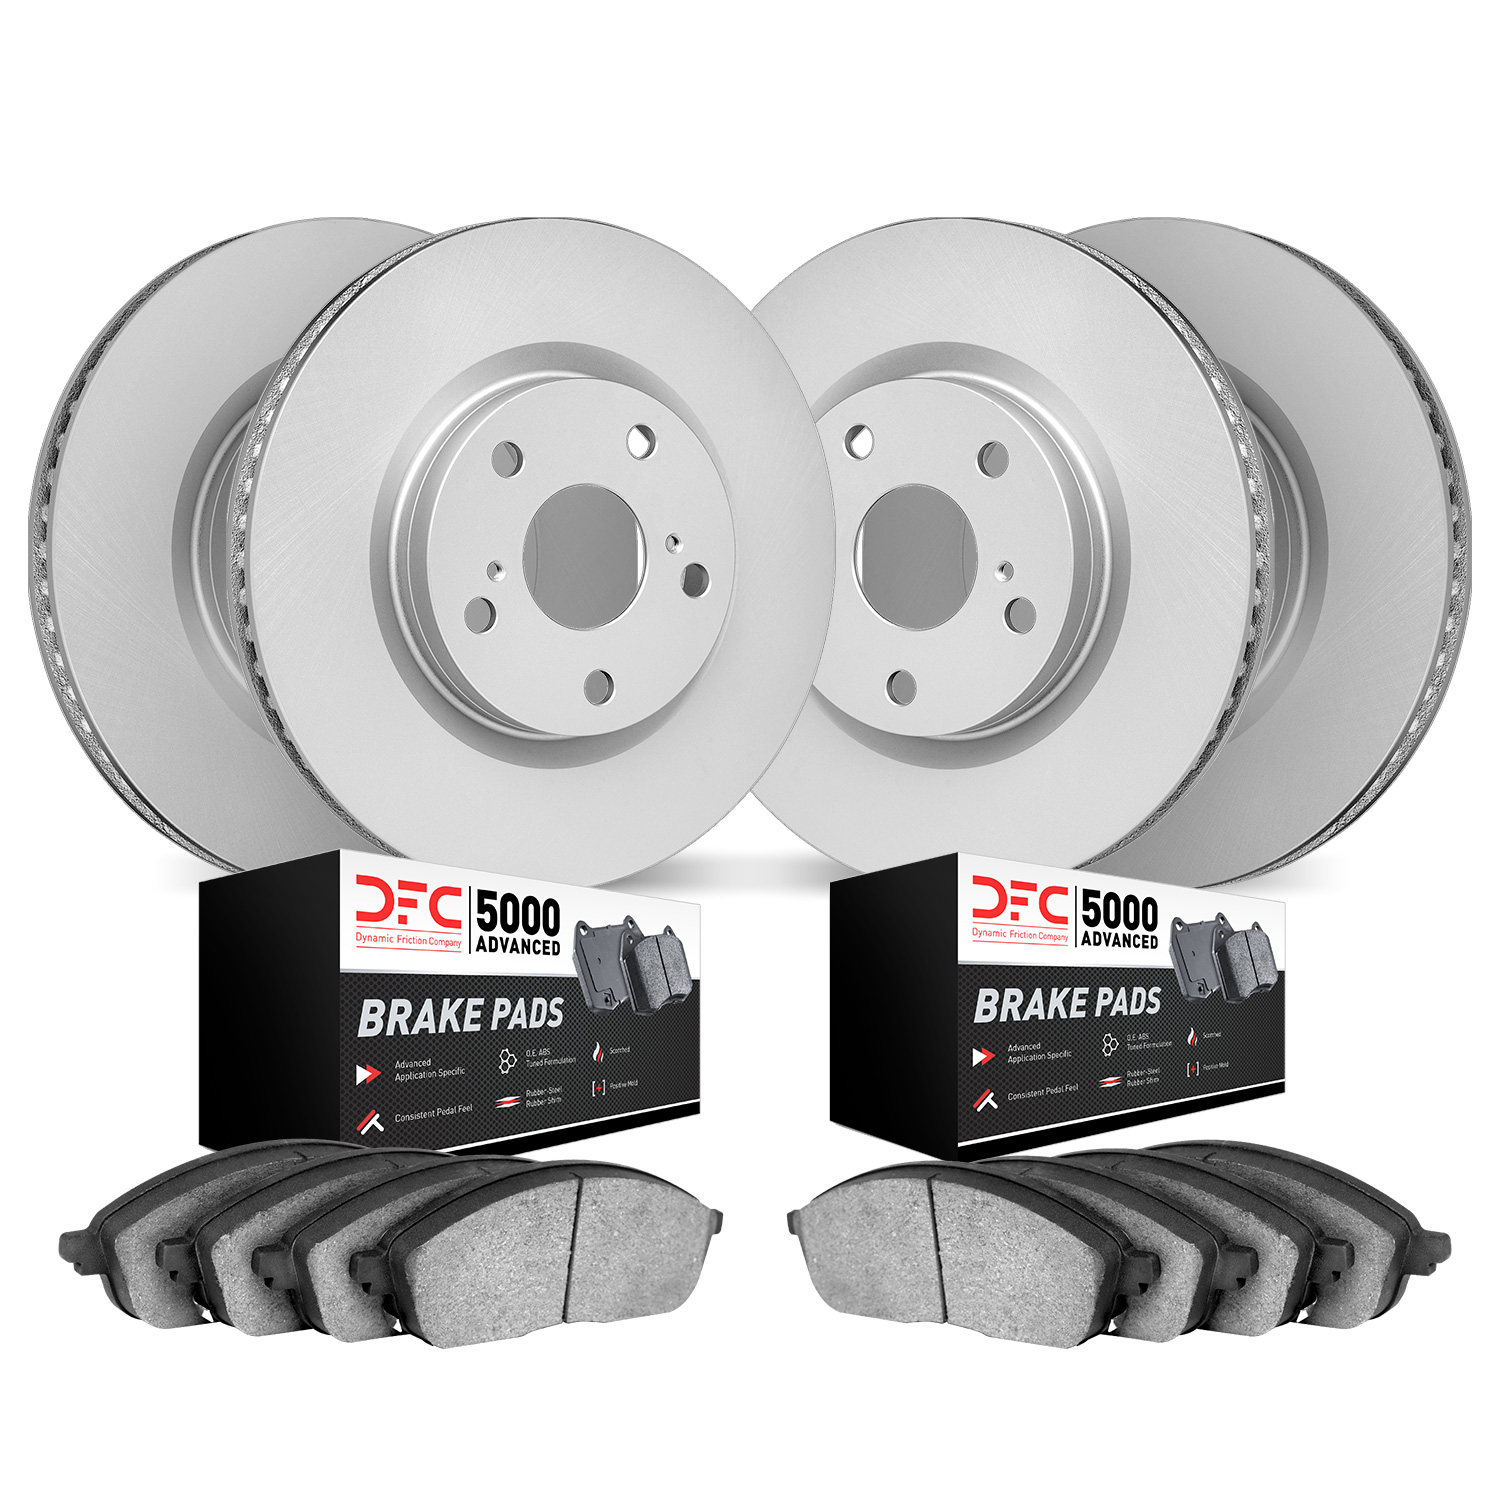 4504-65007 Geospec Brake Rotors w/5000 Advanced Brake Pads Kit, 2003-2003 GM, Position: Front and Rear